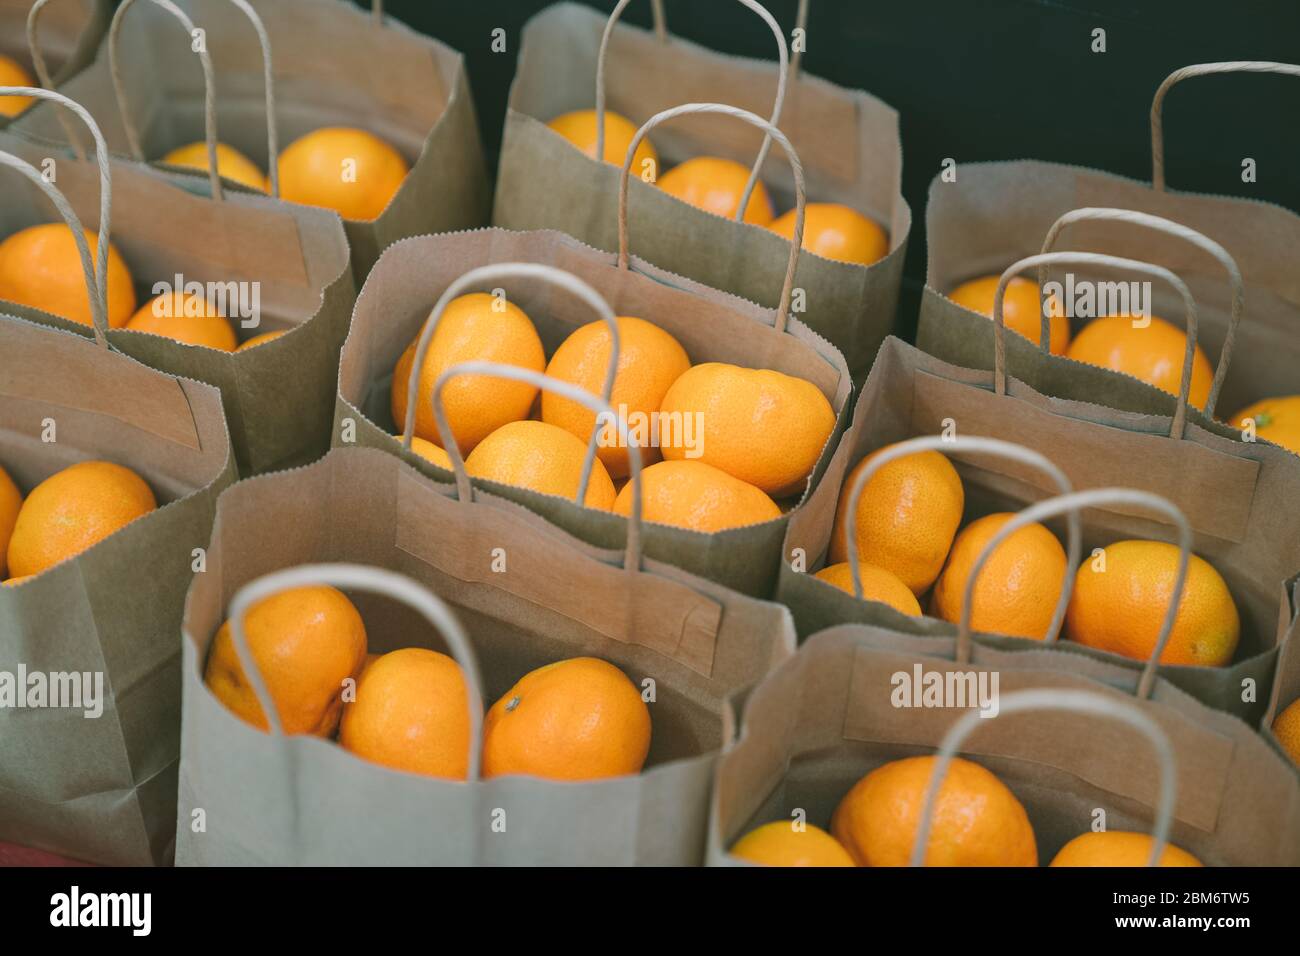 Set of Mandarins or oranges pun in the brown paper bag for sale Stock Photo  - Alamy